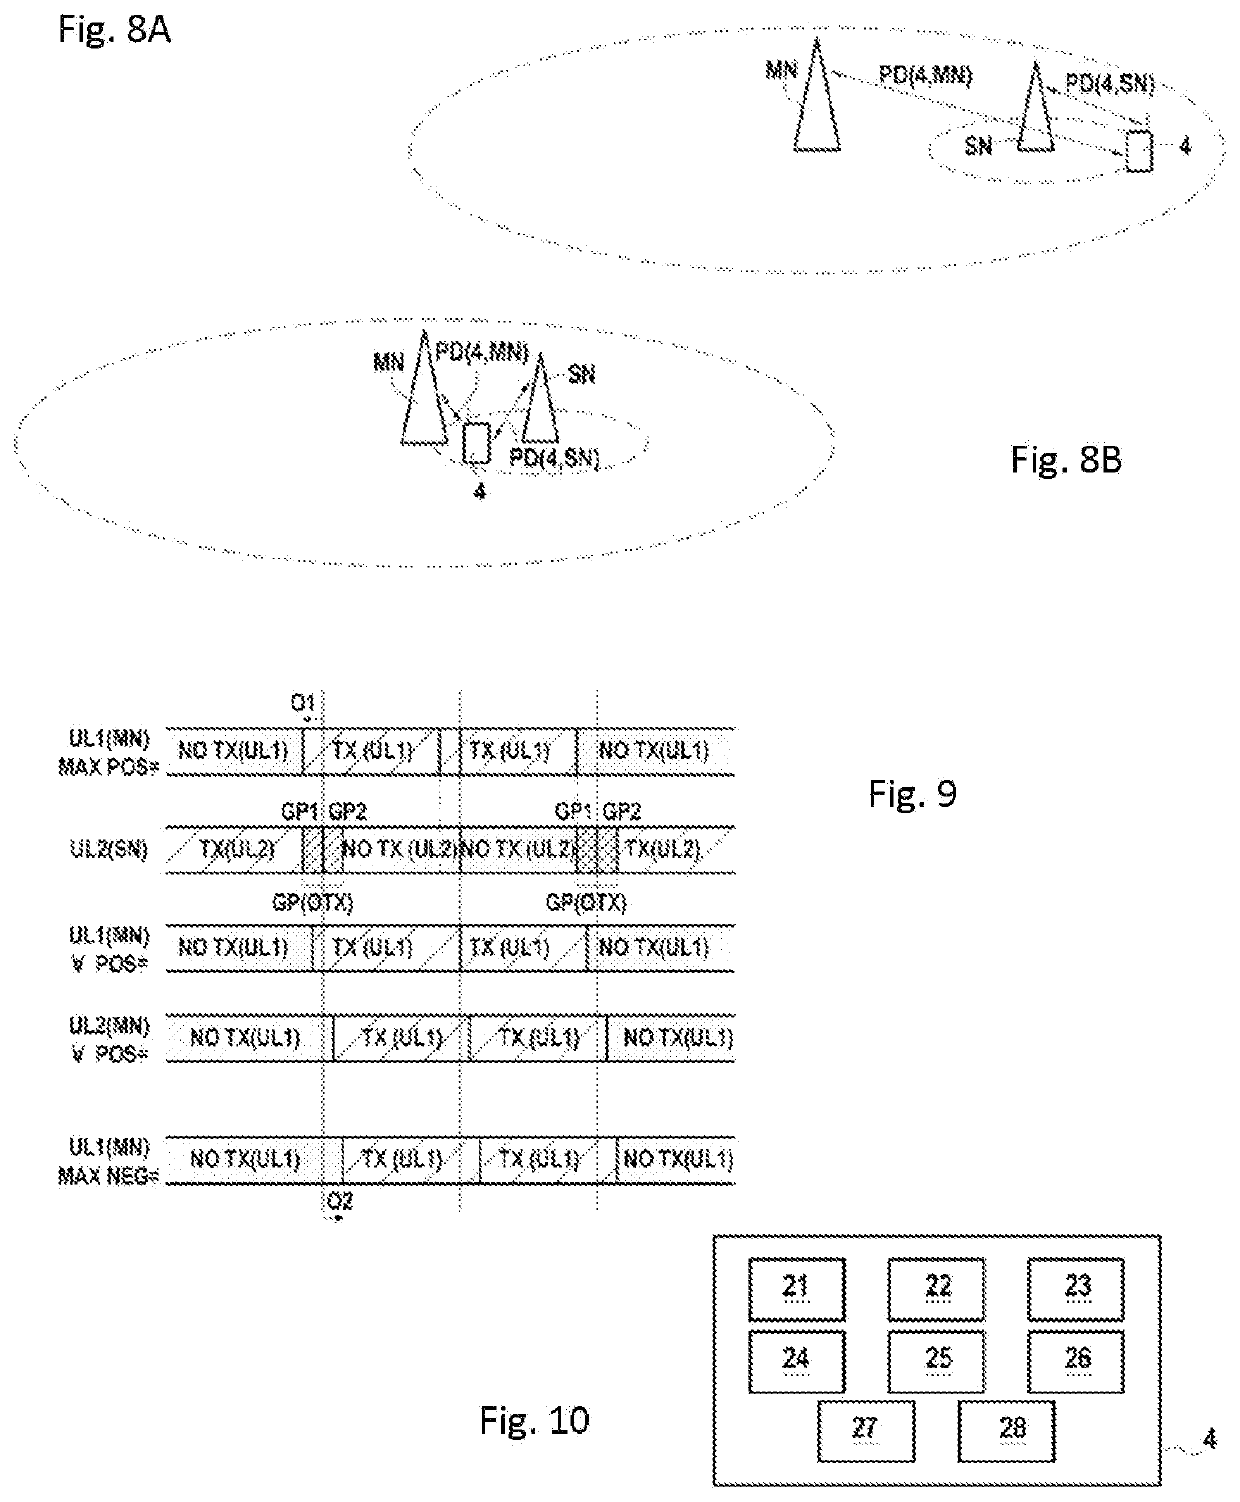 Method for managing a transmission of sequences of data symbols